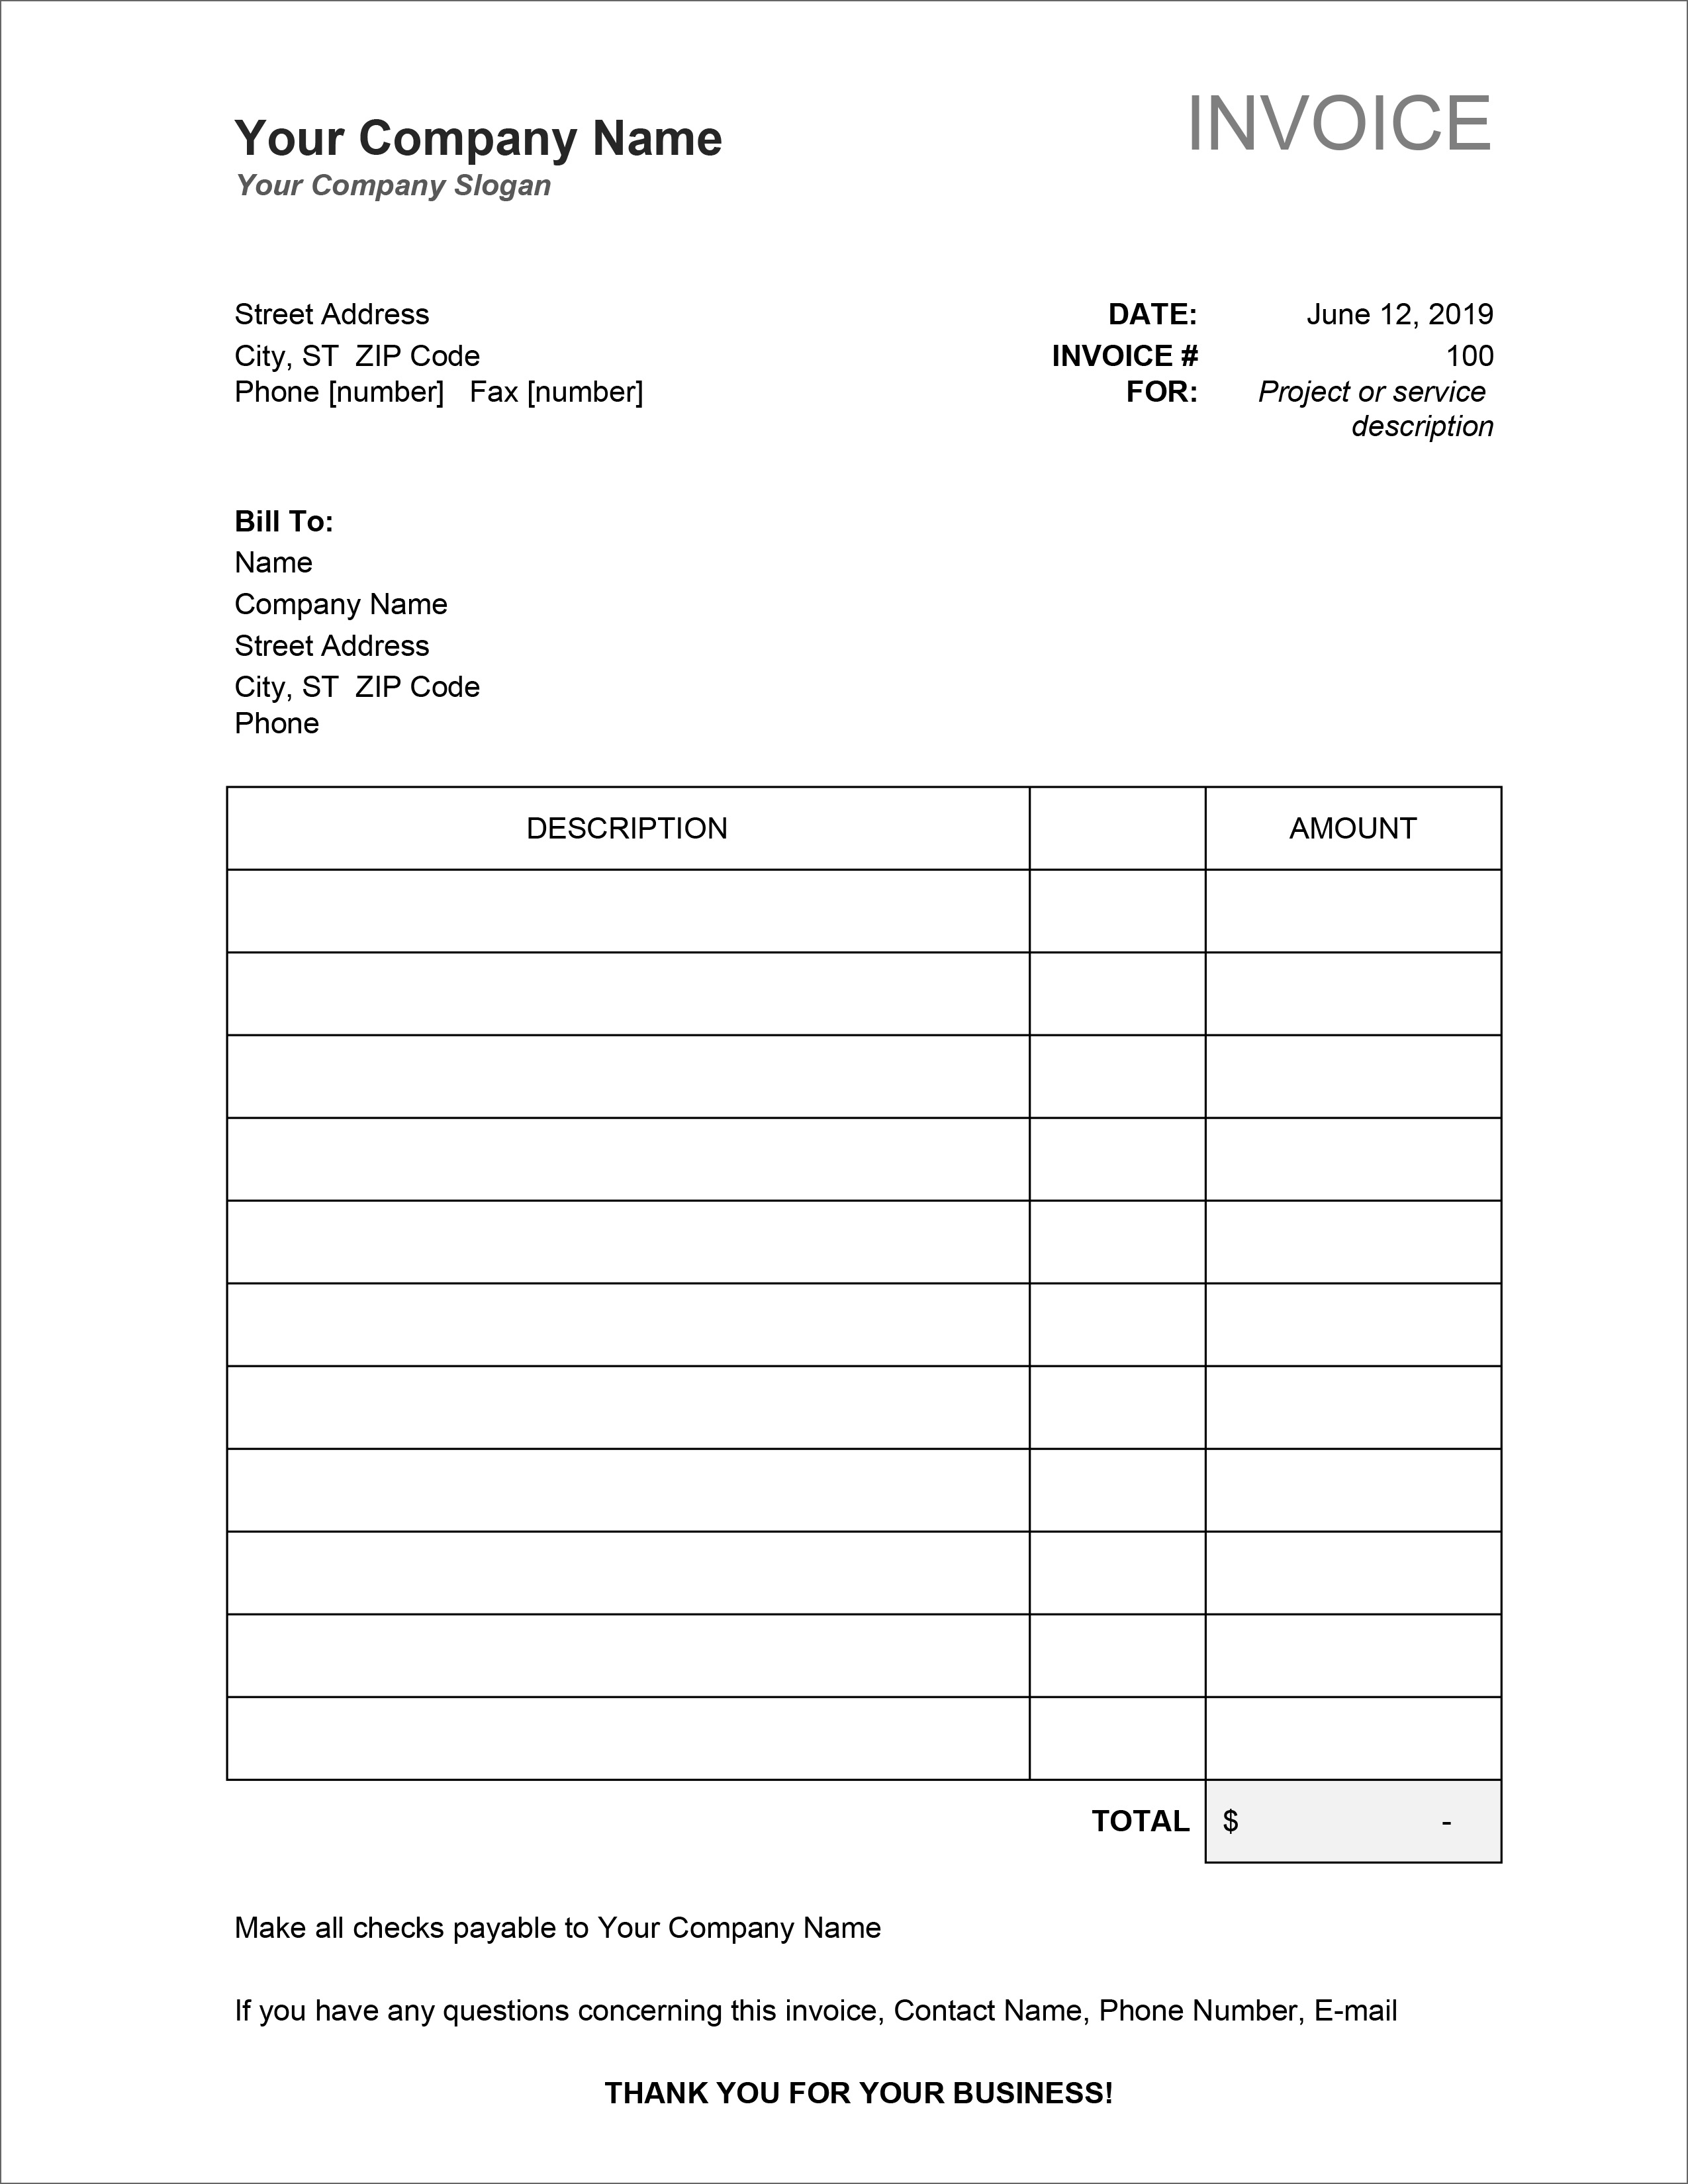 Sample Invoice Template Free Download * Invoice Template Ideas